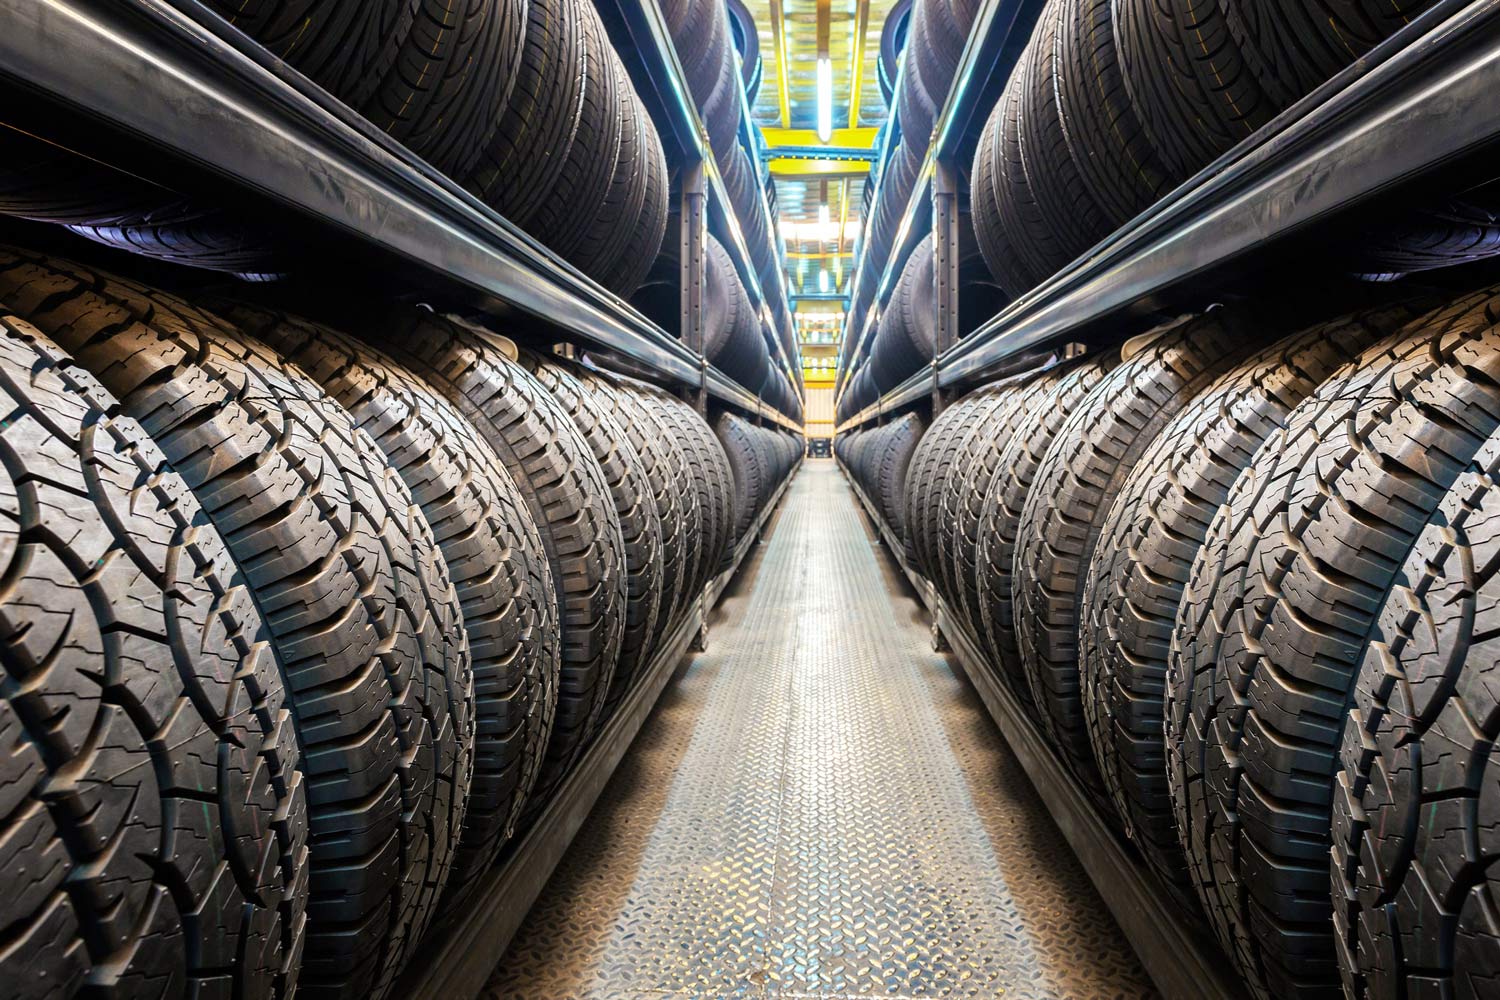 Aisle of tires stacked on shelves.